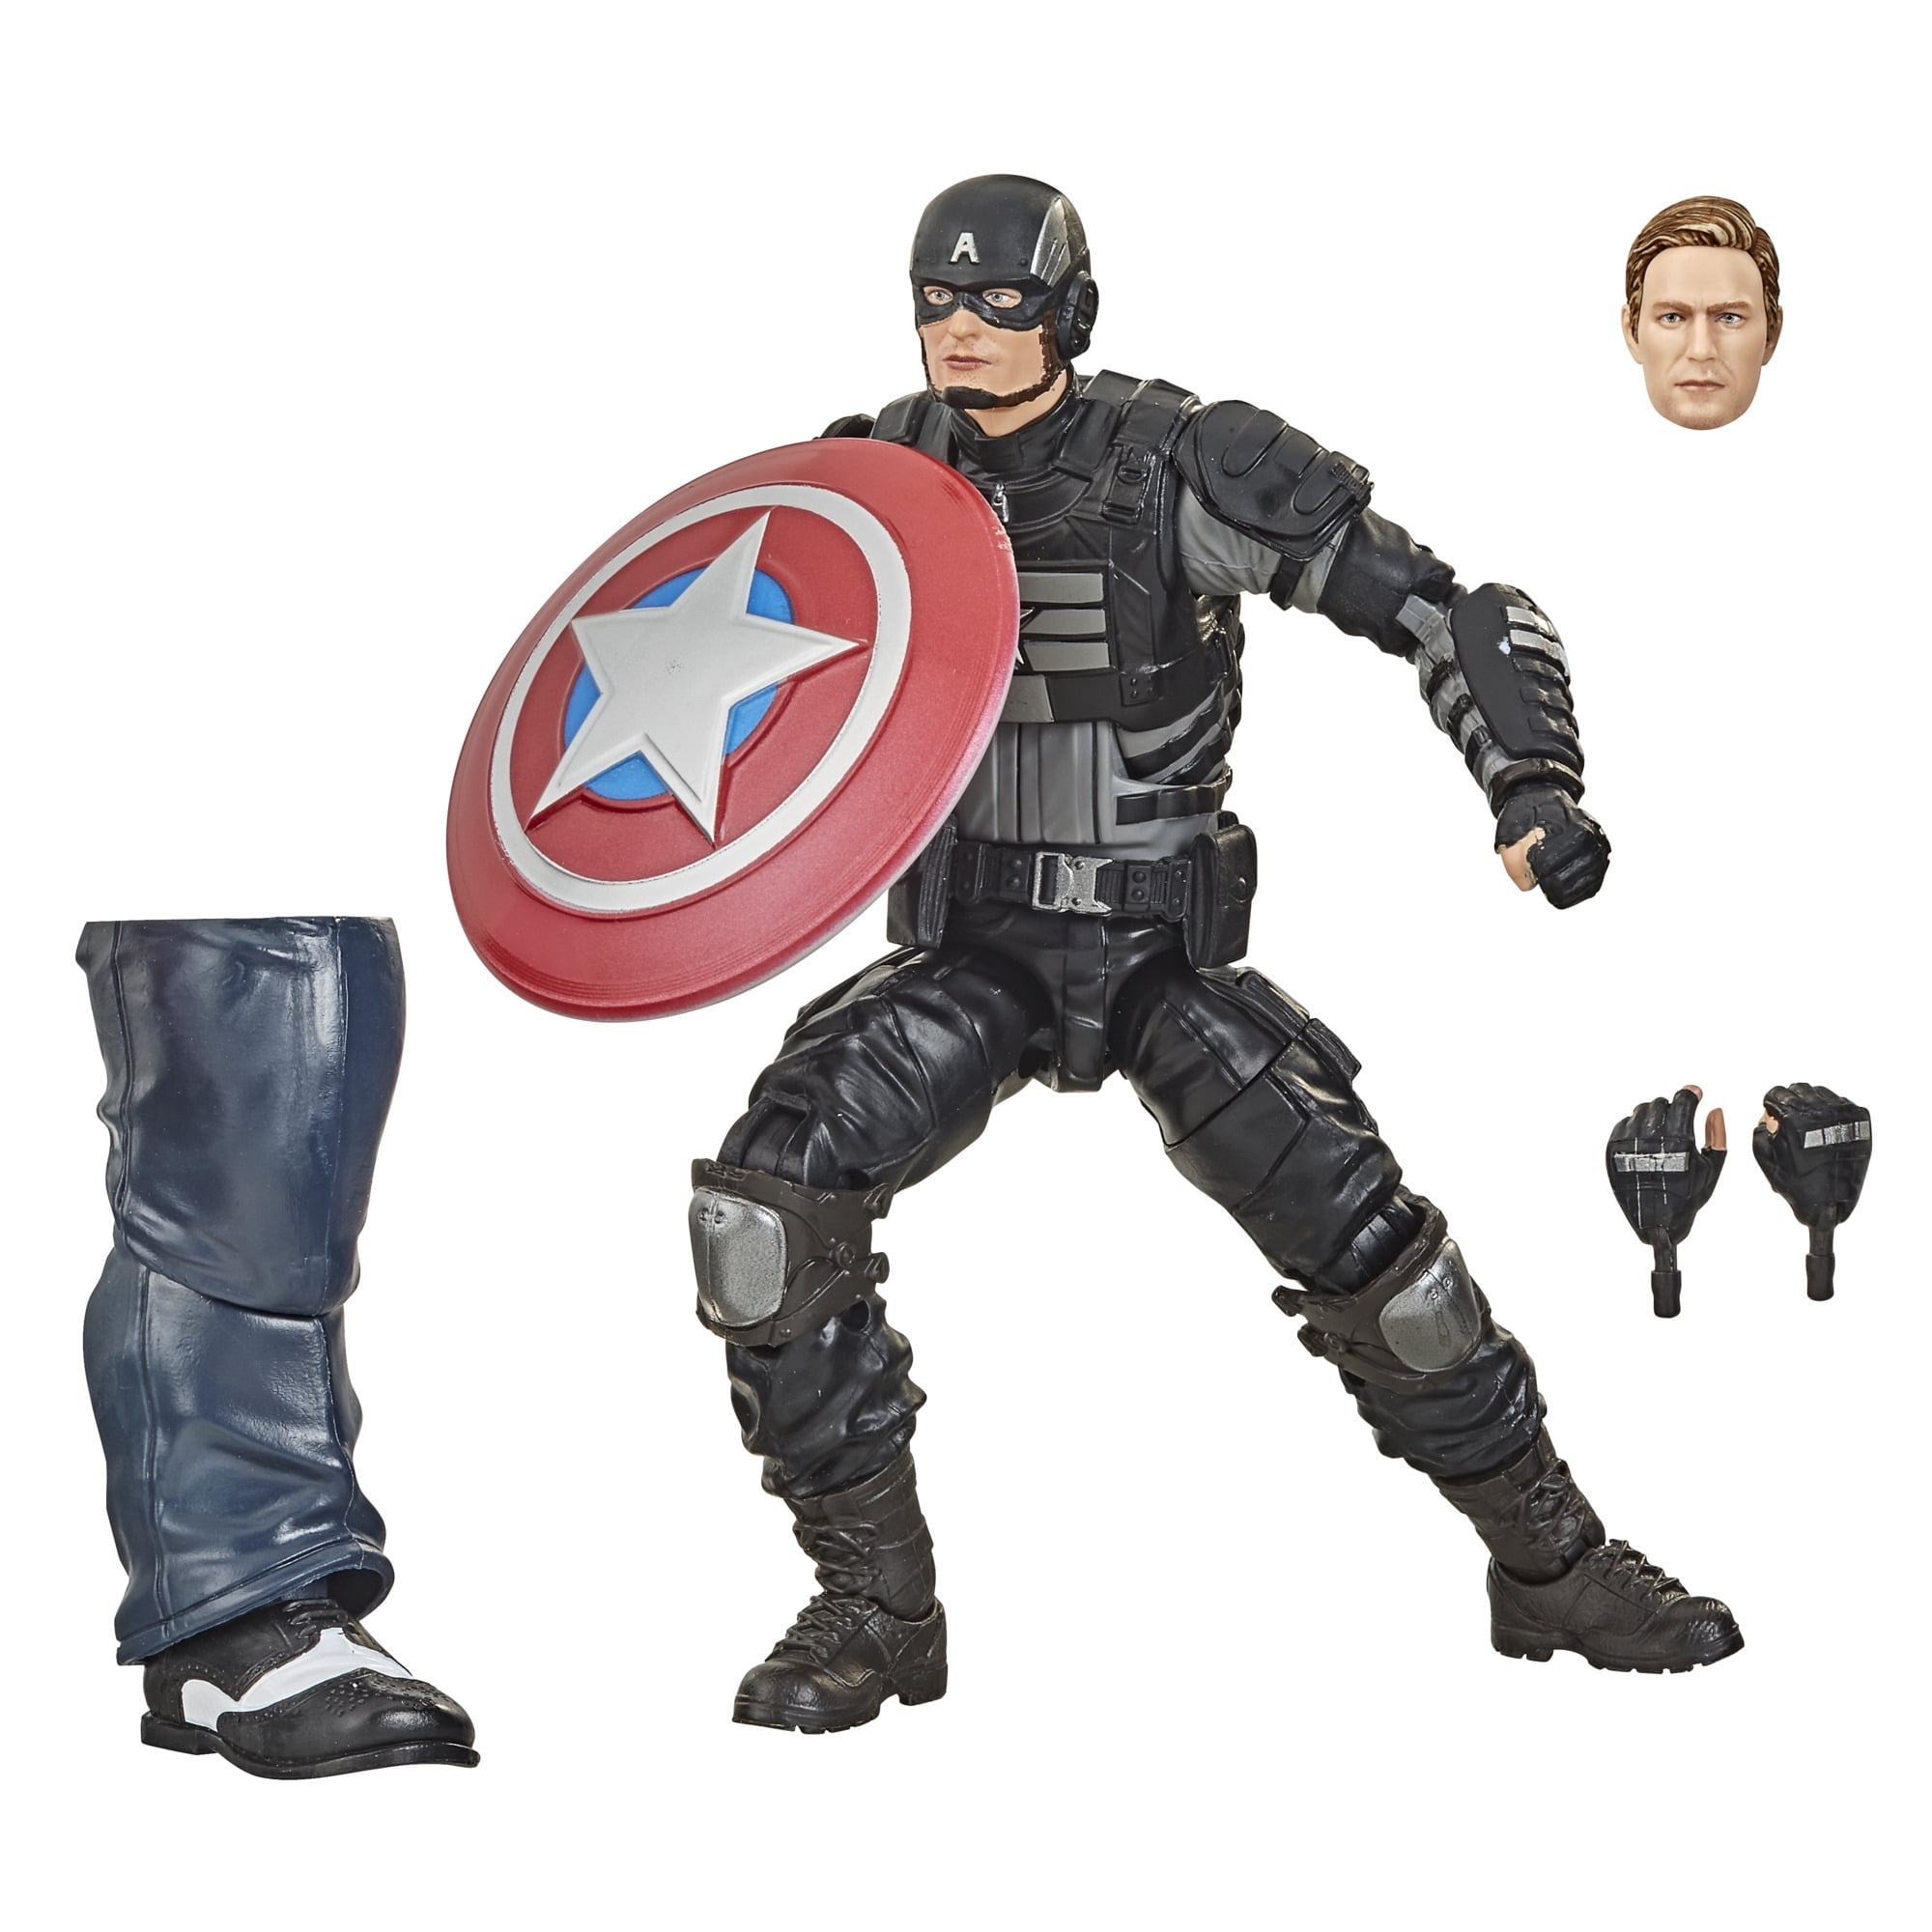 Civil War S.H.Figuarts Toy Gift In Box 6" Black Panther Figure Captain America 